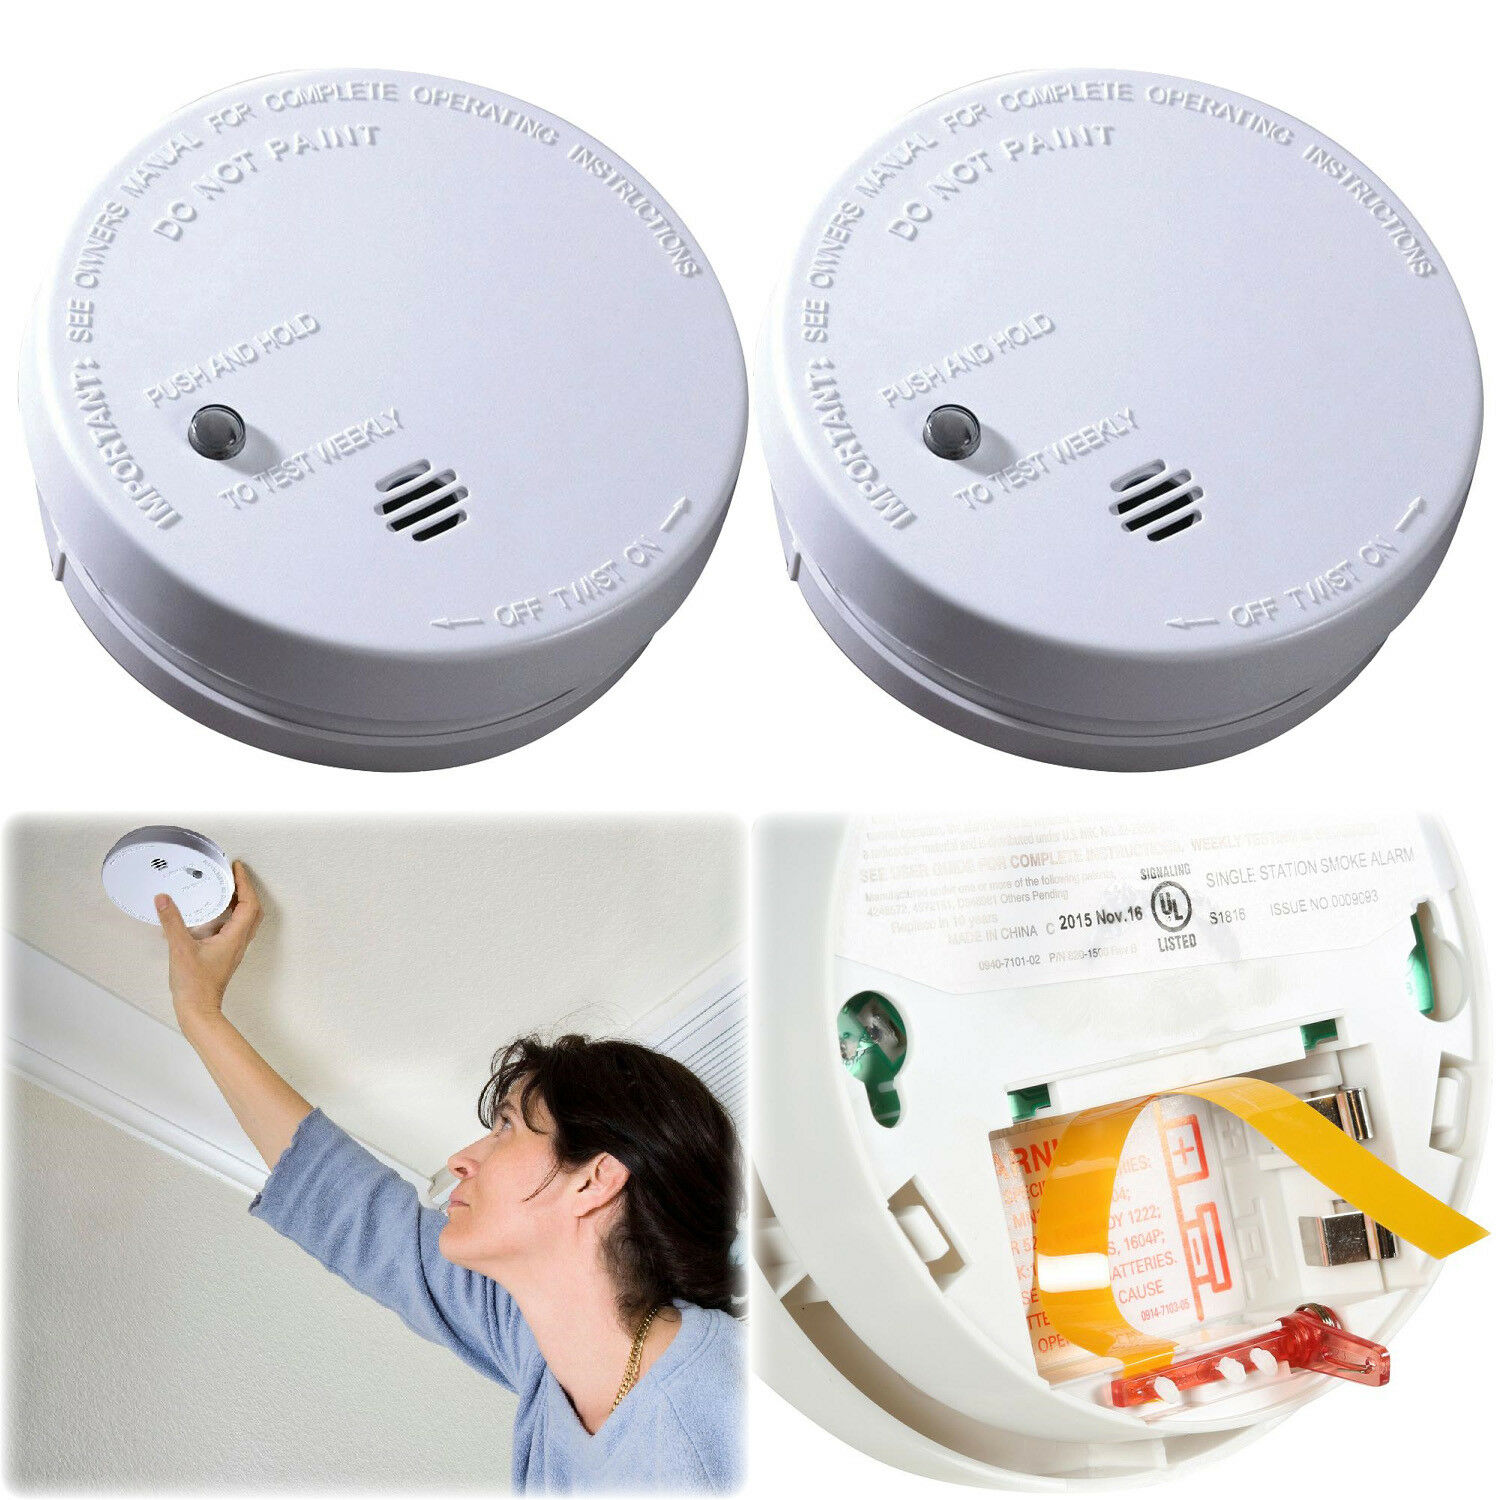 2 Pack Ionization Smoke Detector Battery Operated Home Fire Alarm Safety Sensor